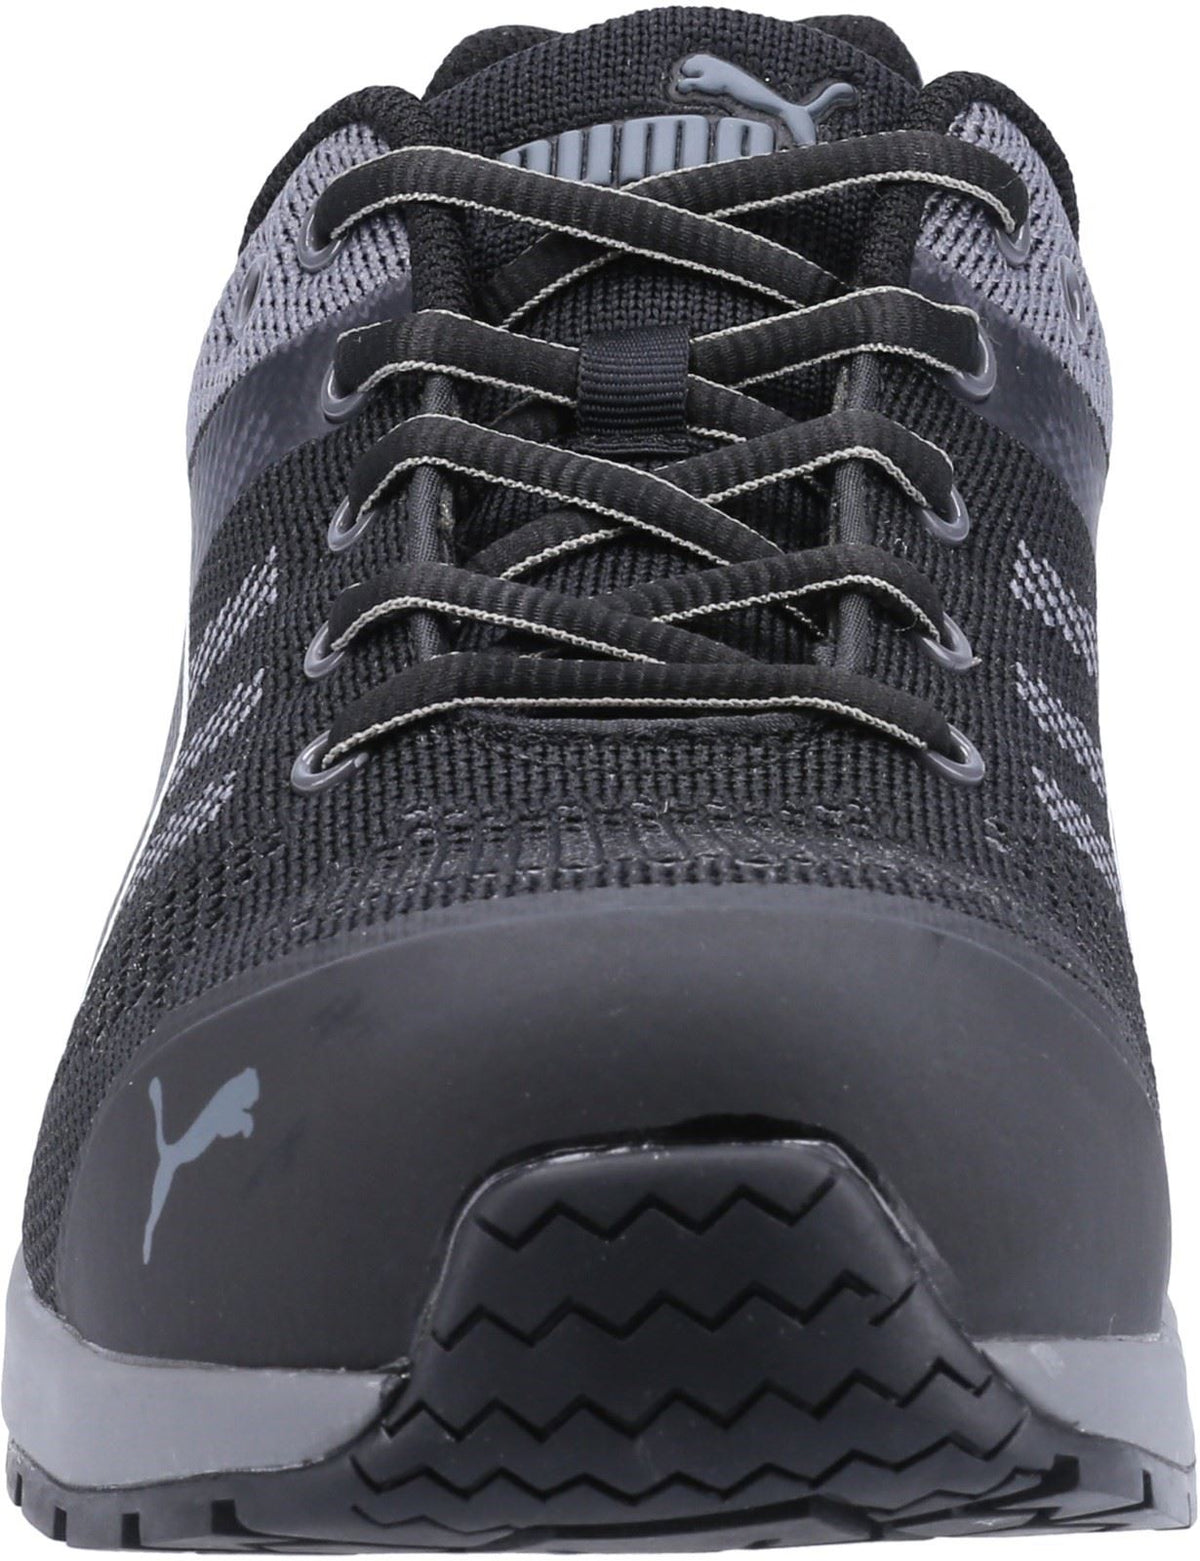 Puma Safety Elevate Knit LOW S1 Safety Trainers